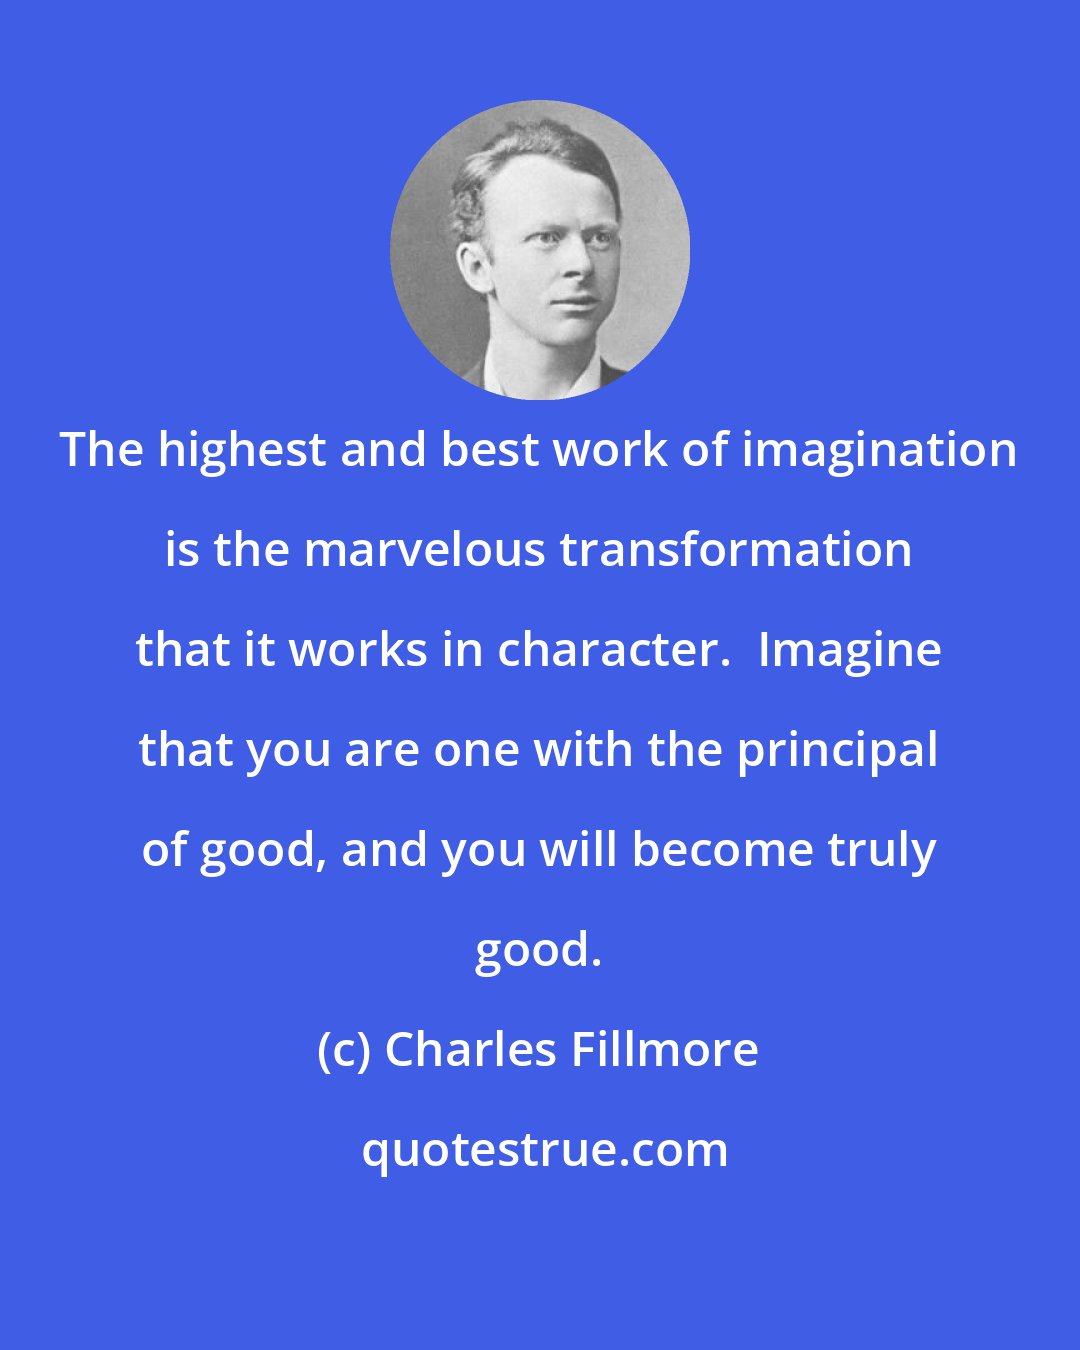 Charles Fillmore: The highest and best work of imagination is the marvelous transformation that it works in character.  Imagine that you are one with the principal of good, and you will become truly good.